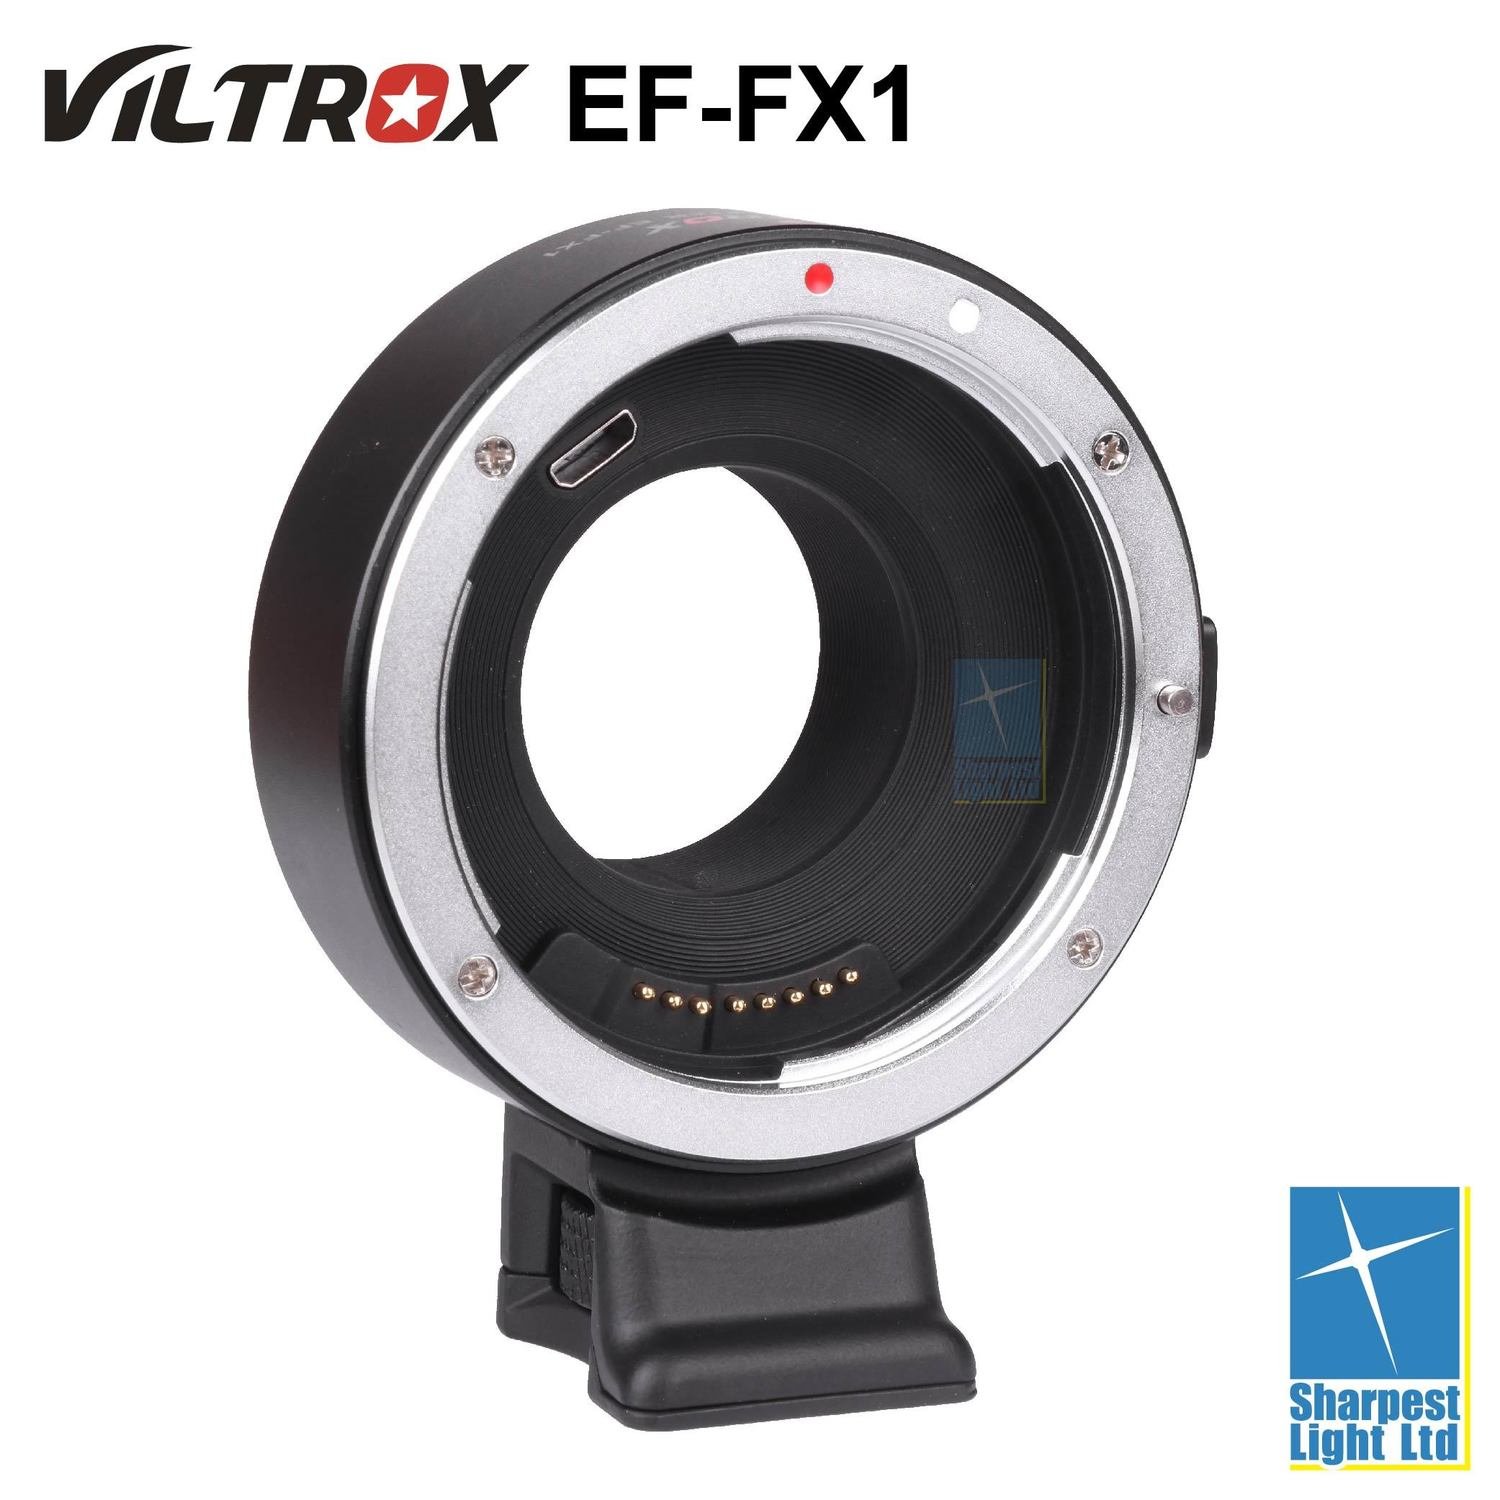 Viltrox EF-FX1 Electronic Adapter for Canon Lens to Fuji X Mount Camera